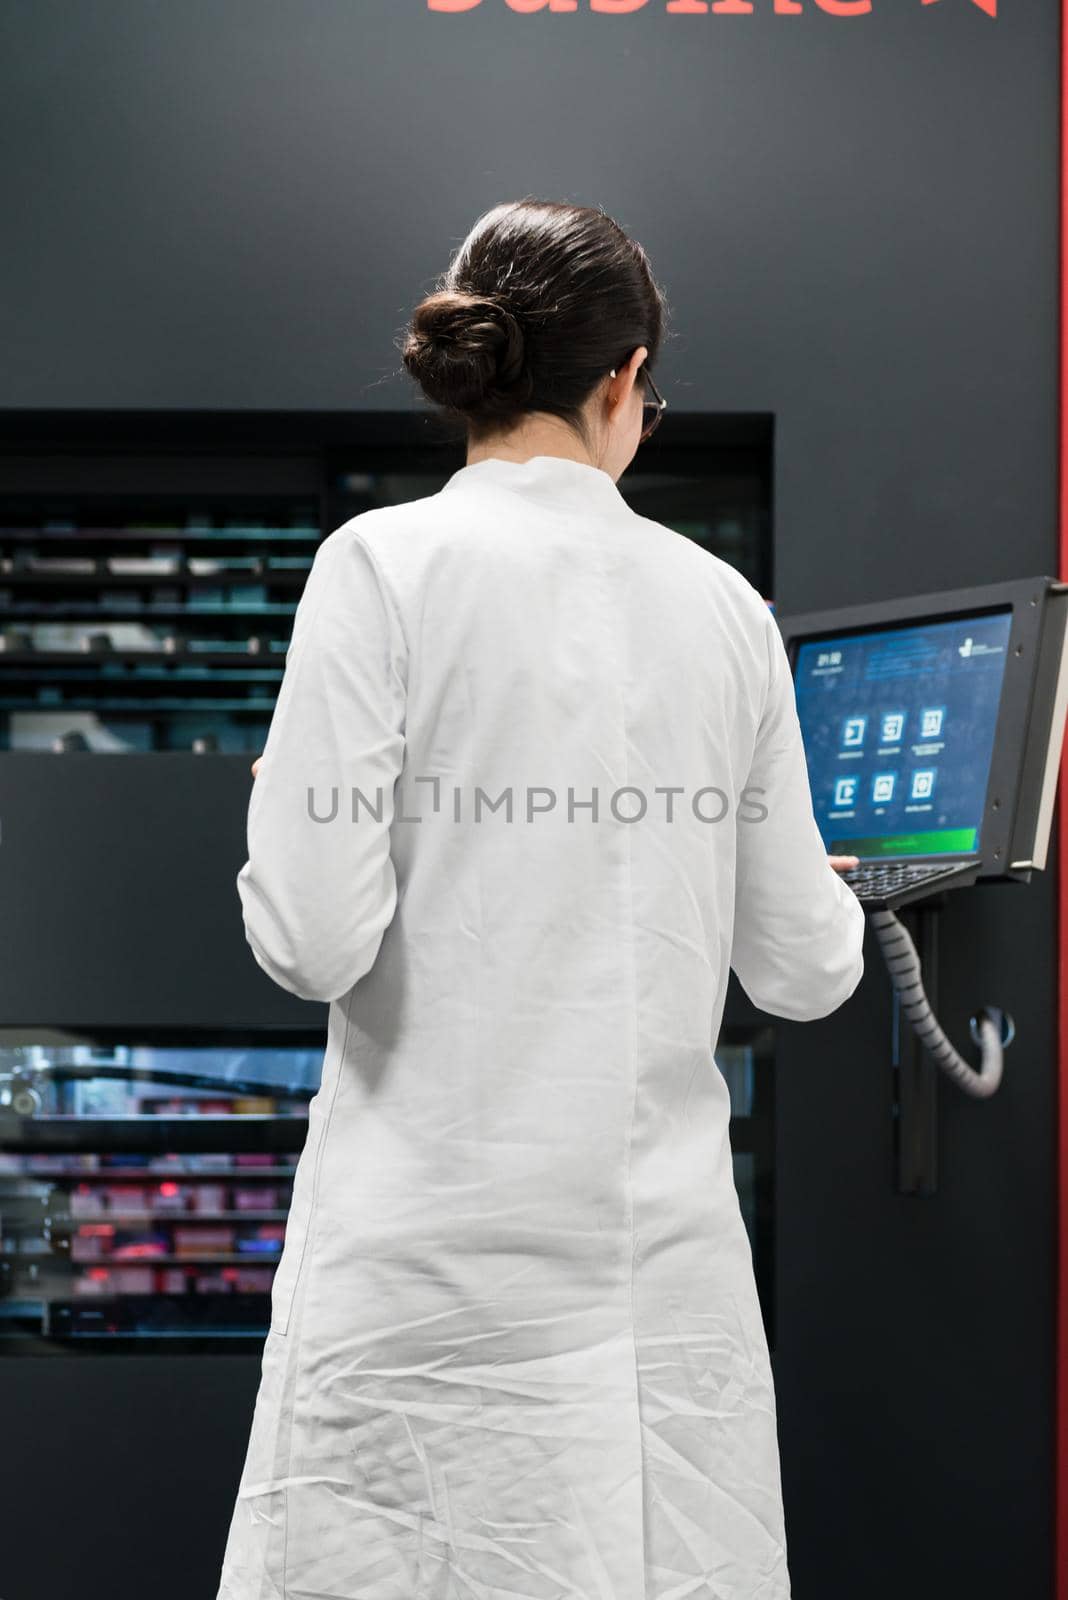 pharmacist using a computer while managing the drug stock in pharmacy by Kzenon